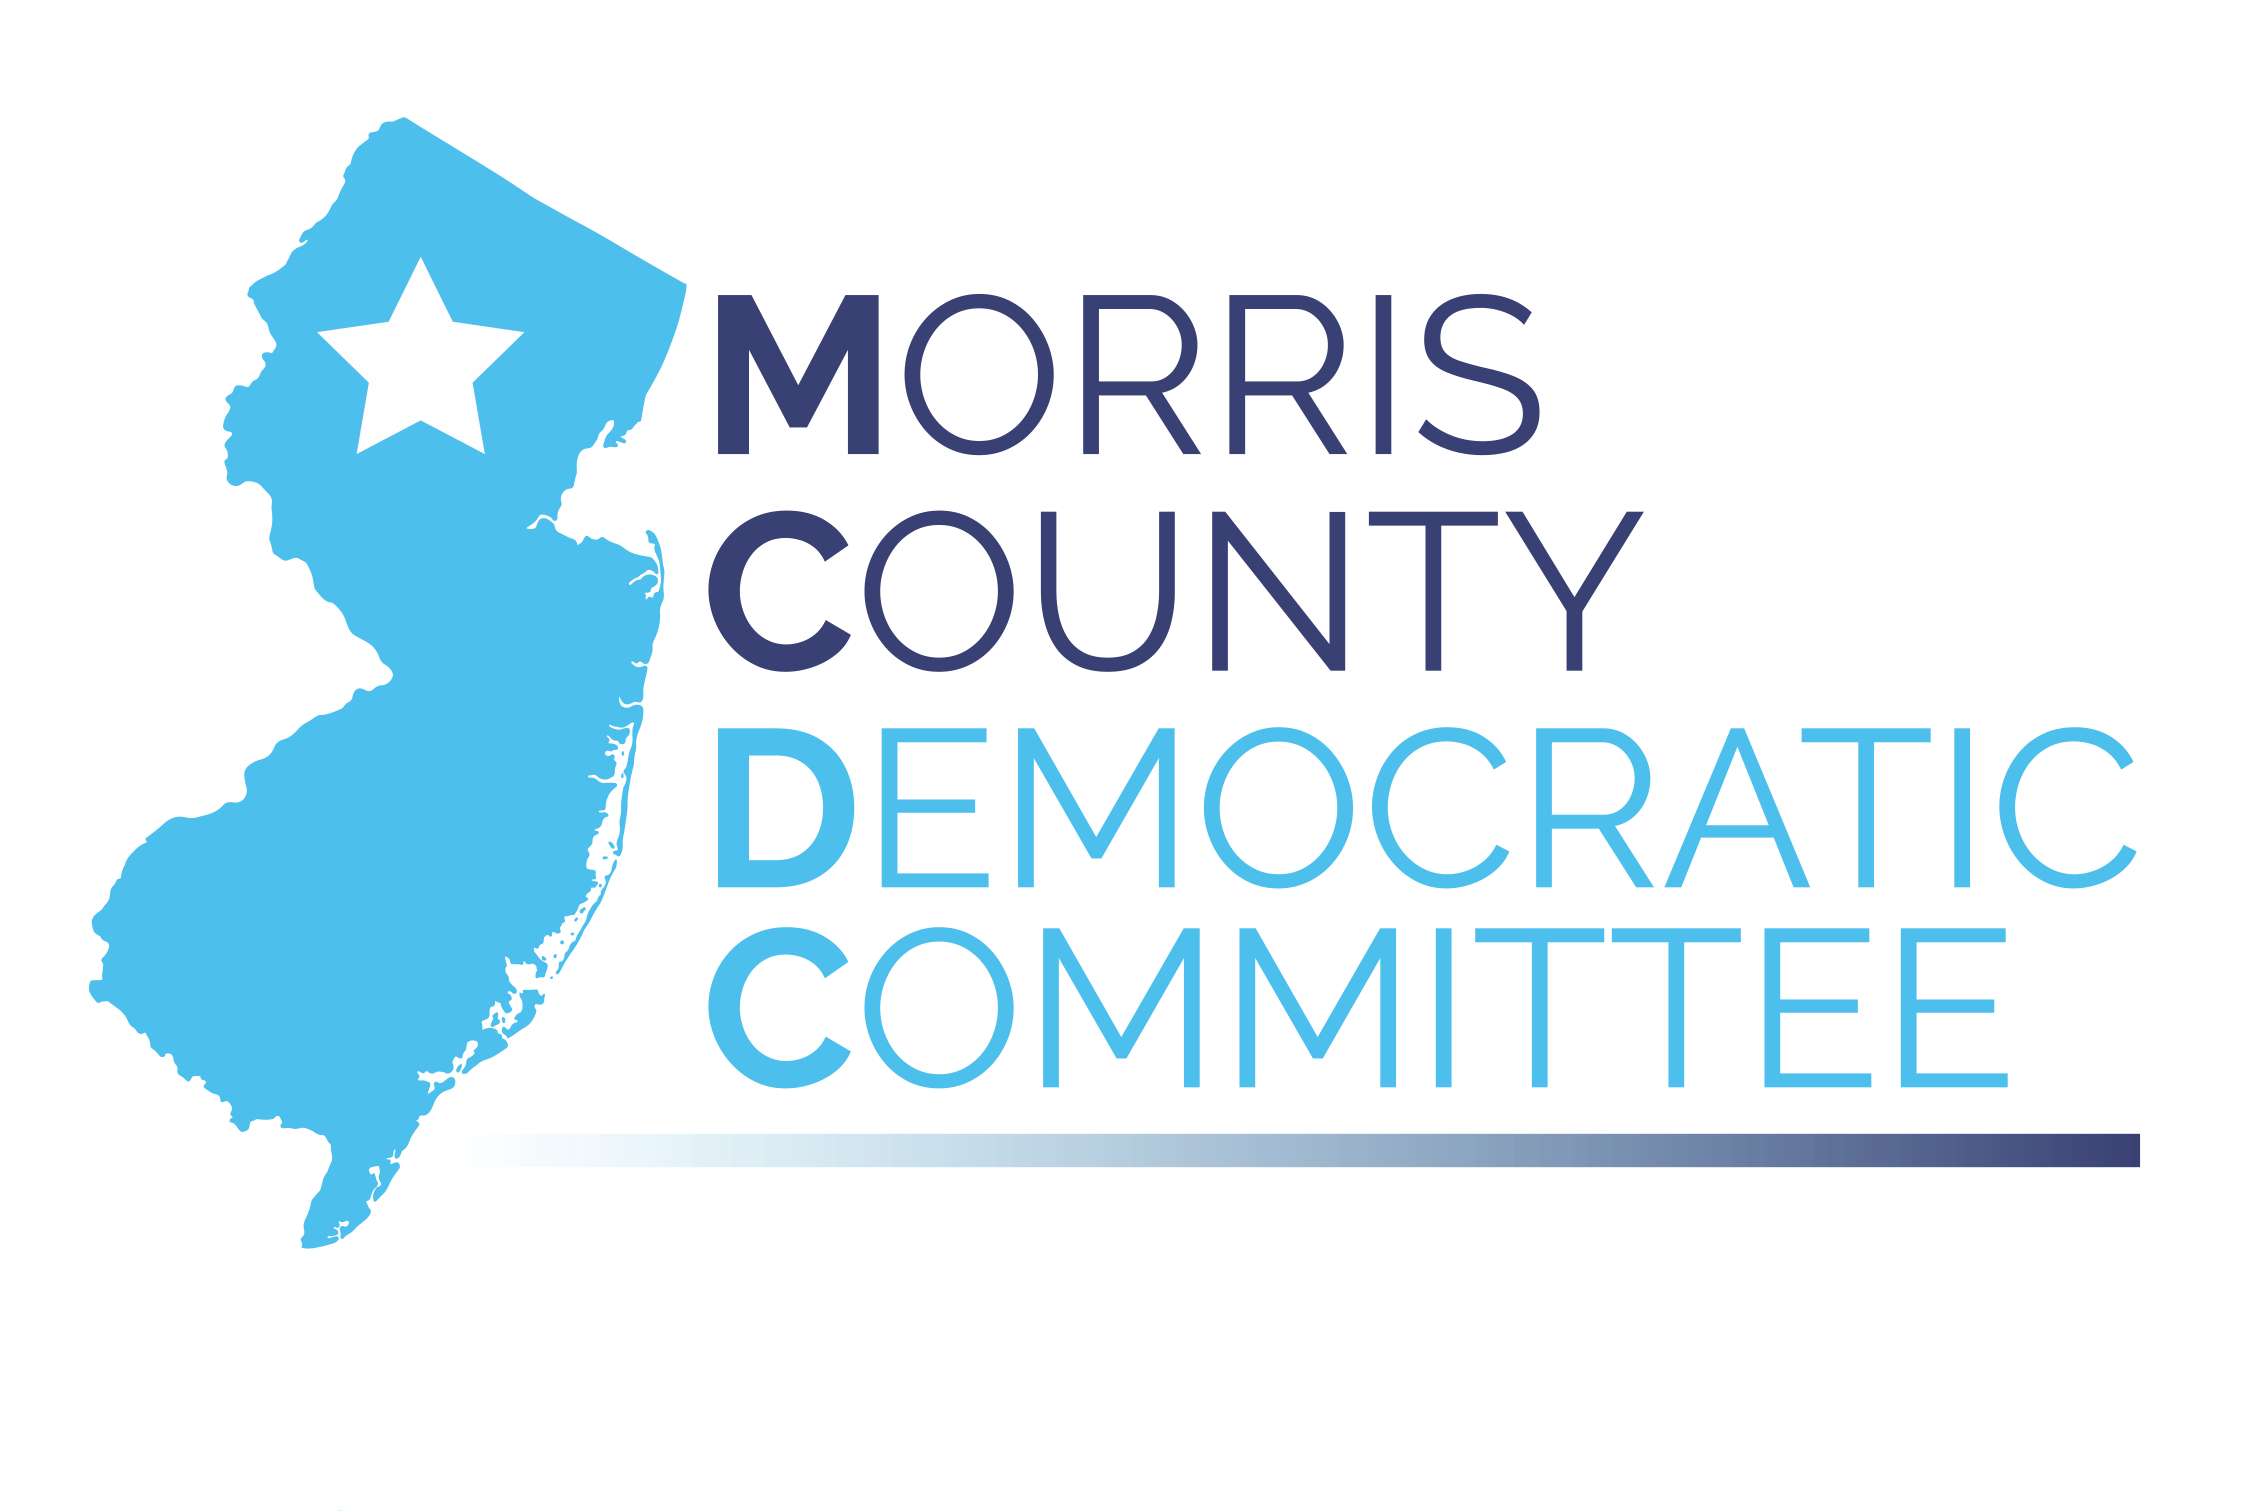 https://morrisdems.org/wp-content/uploads/2021/12/cropped-cropped-MCDC_full-1.png